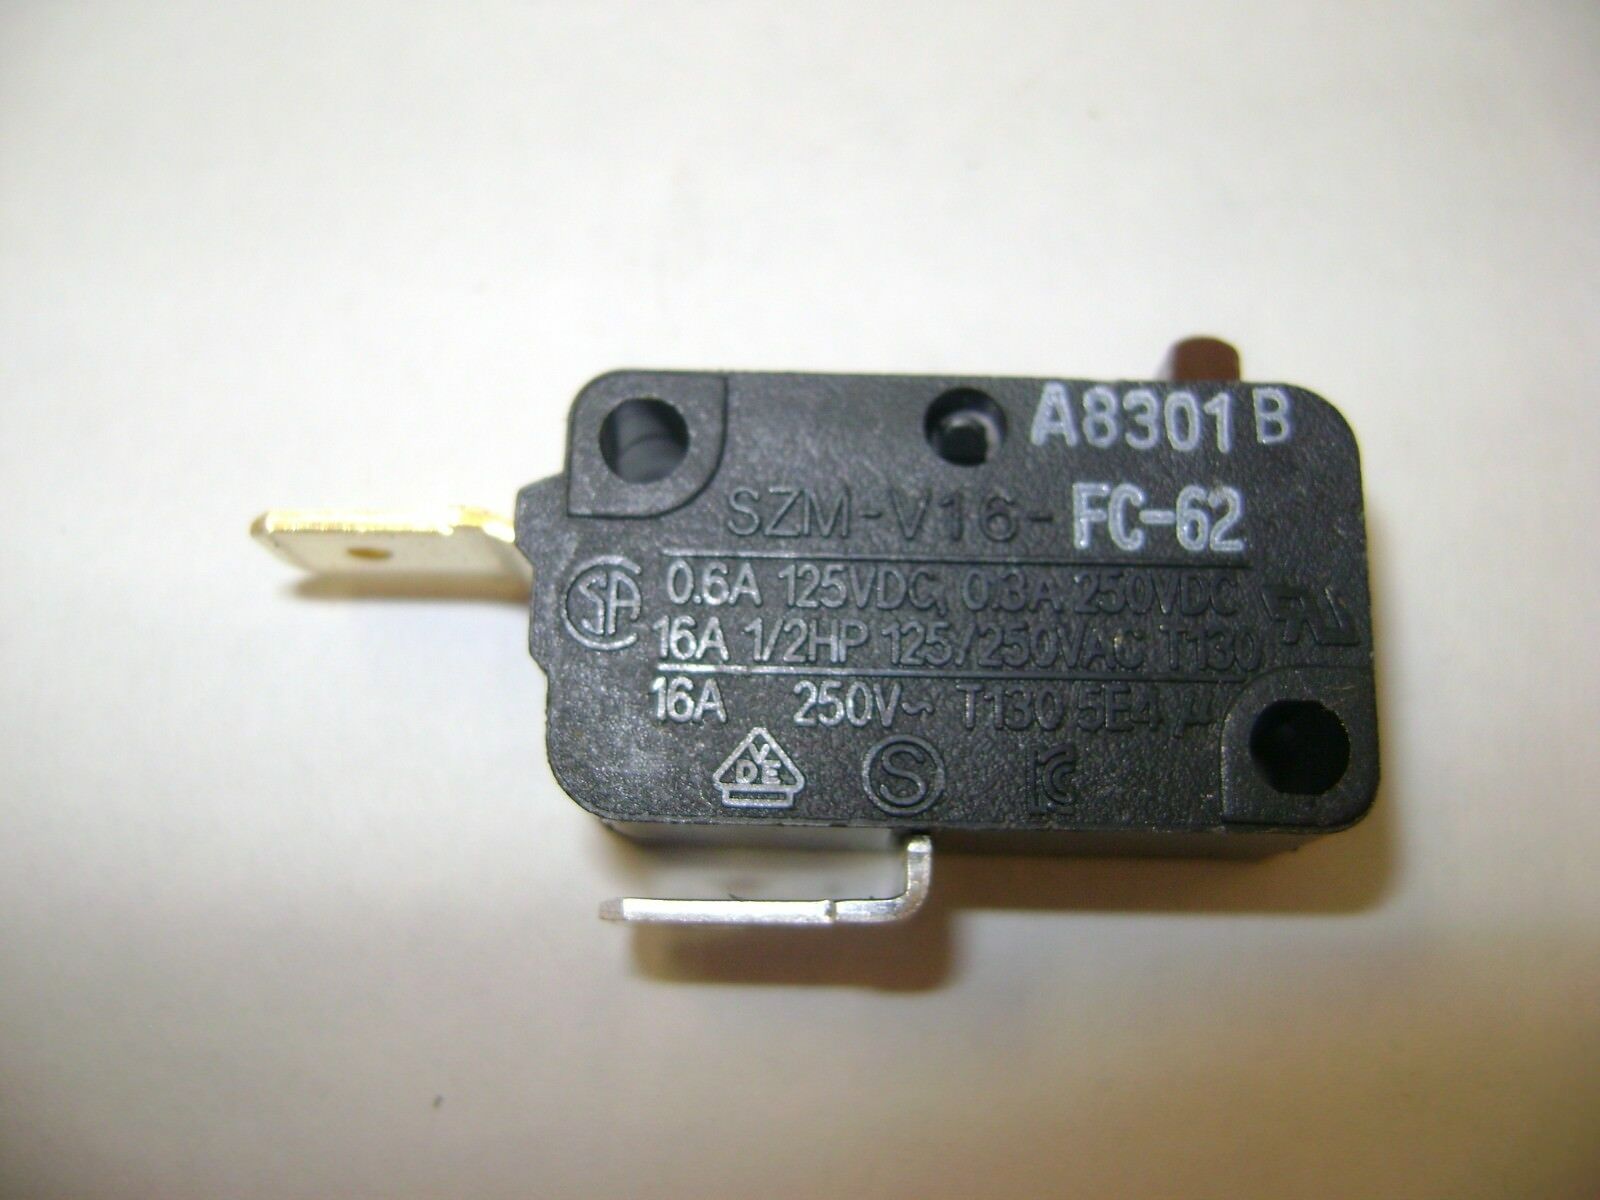 Oem Microwave Oven Szm-v16-fc-62 Door Micro Switch Normally Close W10269458 Fc62